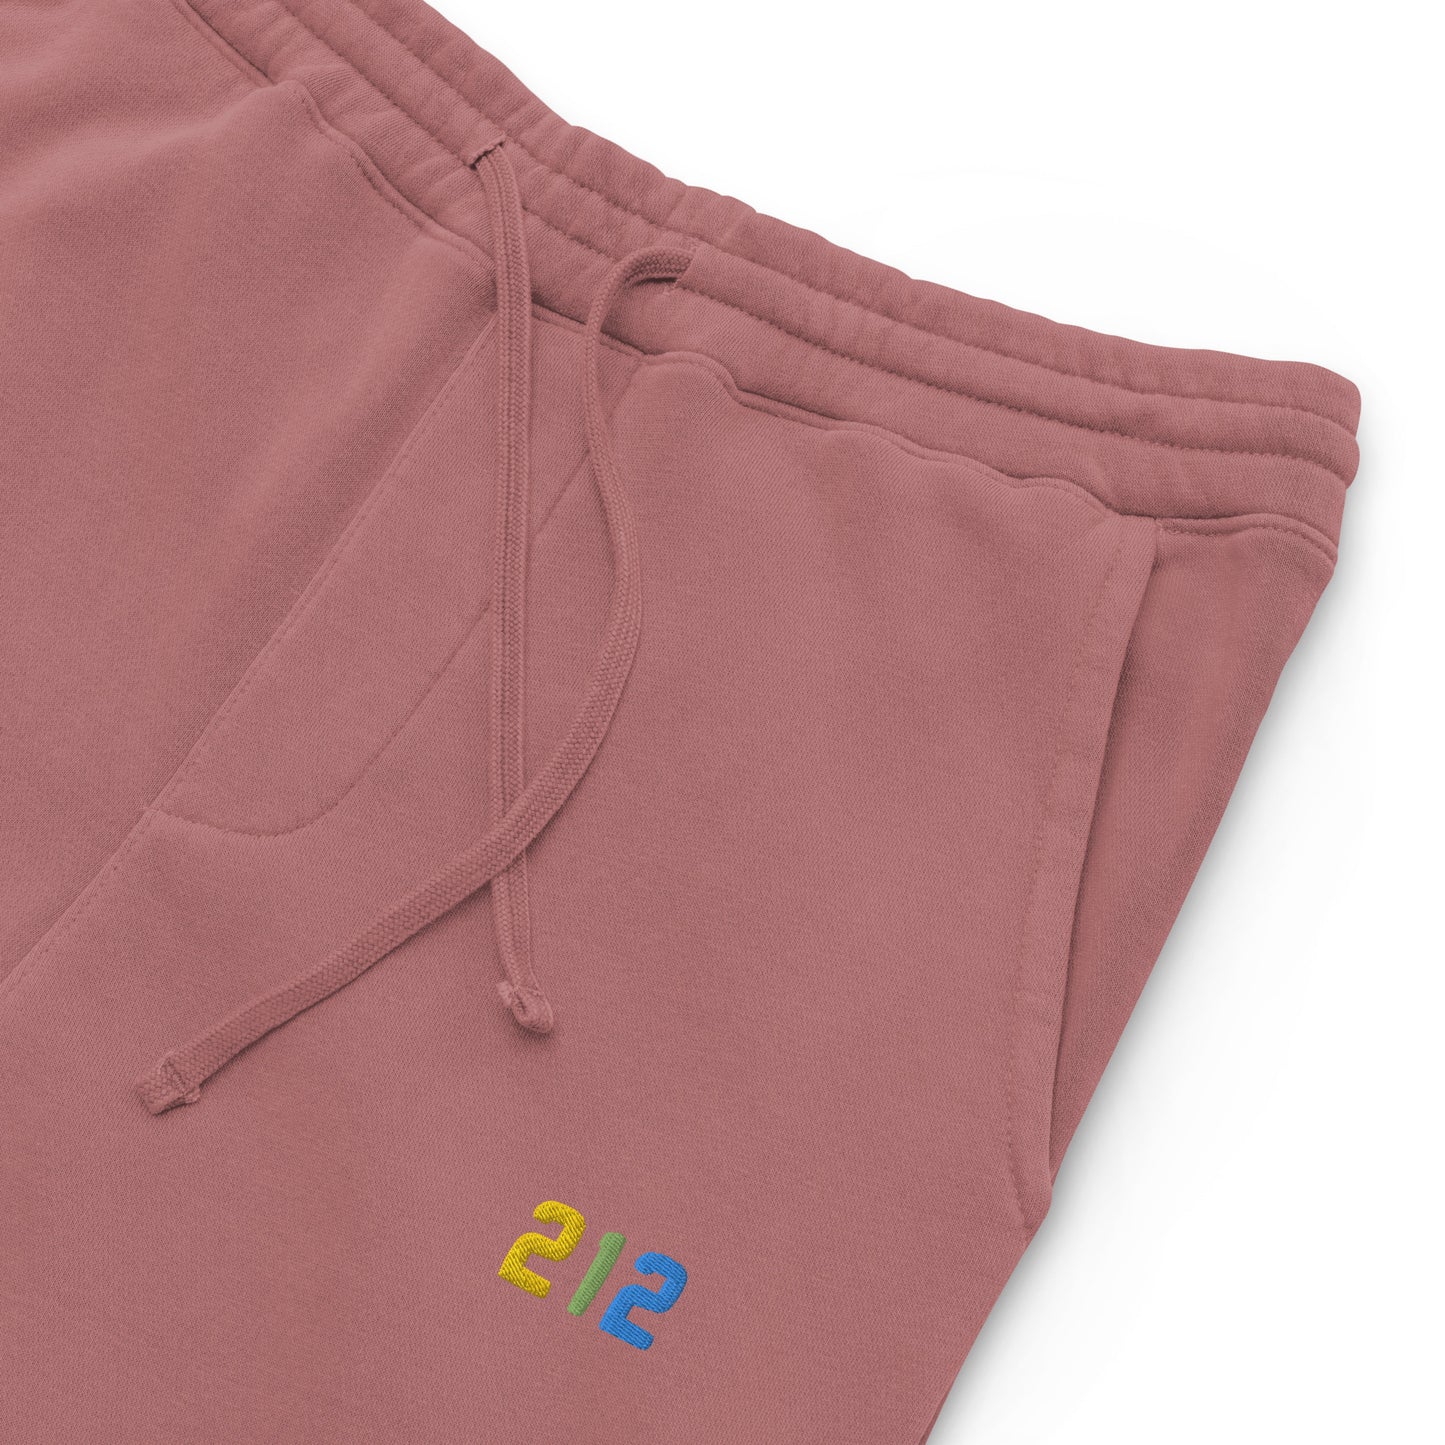 212 Multi Embroidered - Unisex pigment-dyed sweatpants